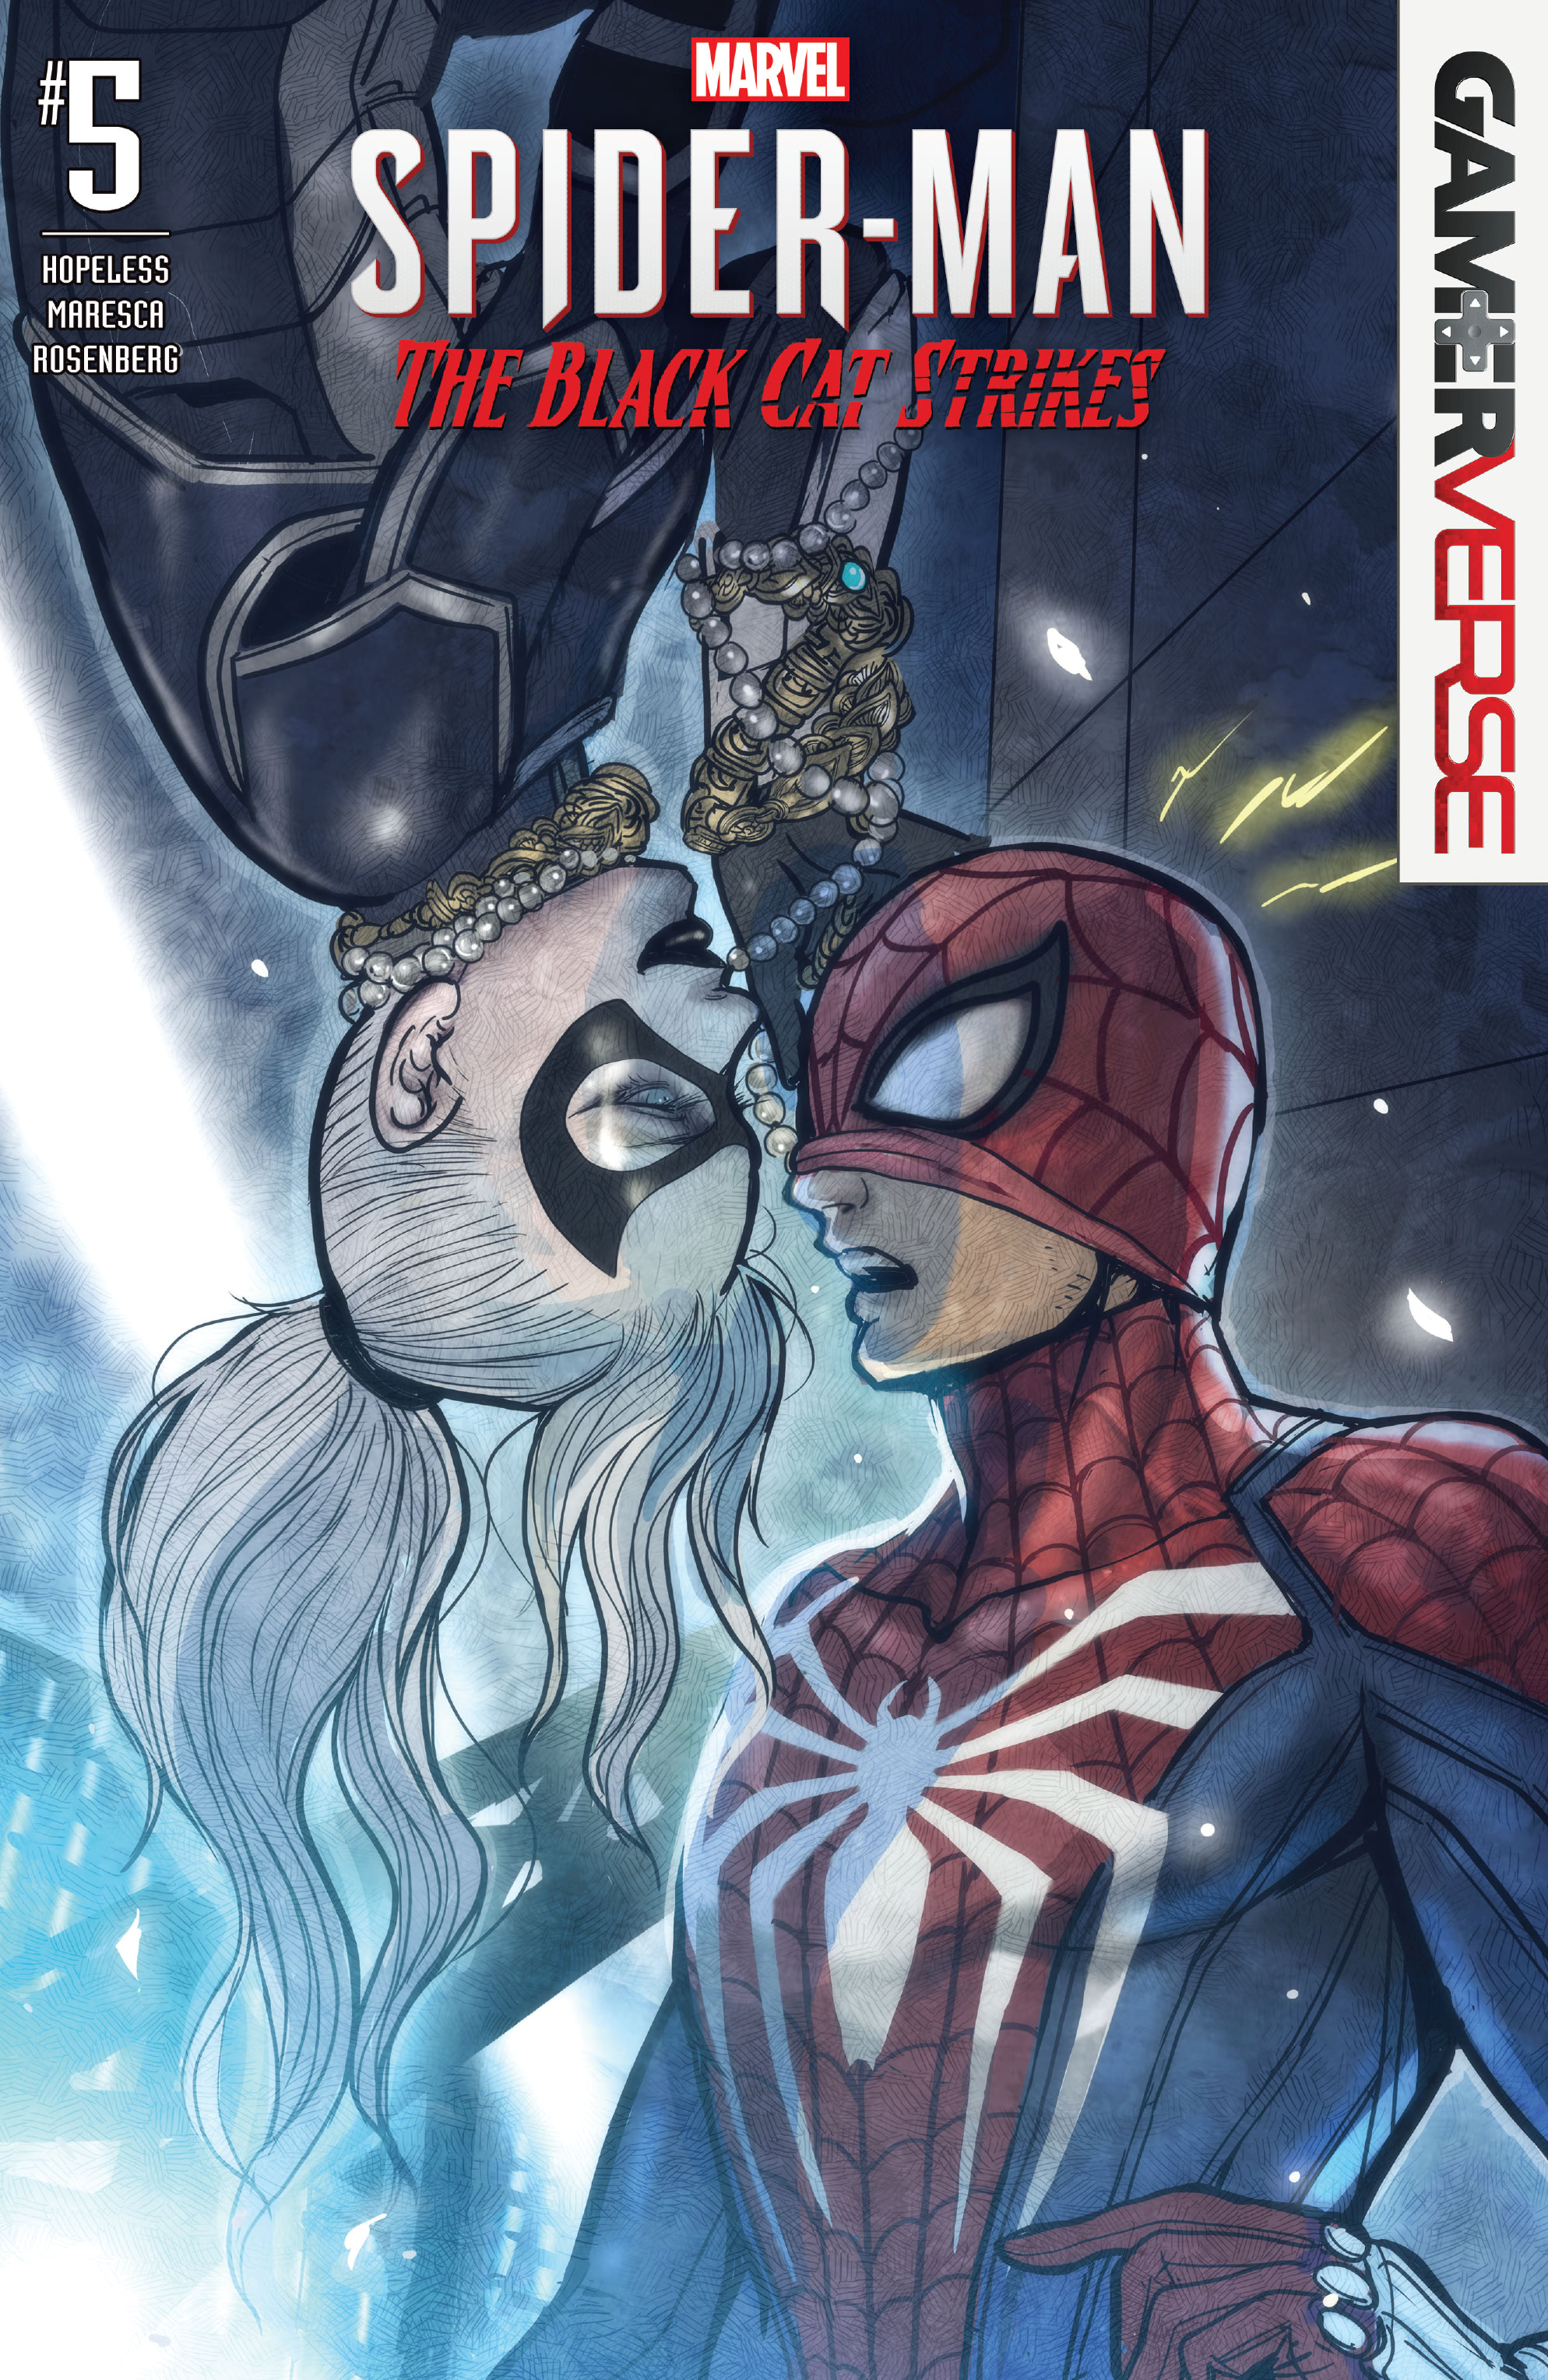 Marvel S Spider Man The Black Cat Strikes Issue 5 | Read Marvel S Spider Man  The Black Cat Strikes Issue 5 comic online in high quality. Read Full Comic  online for